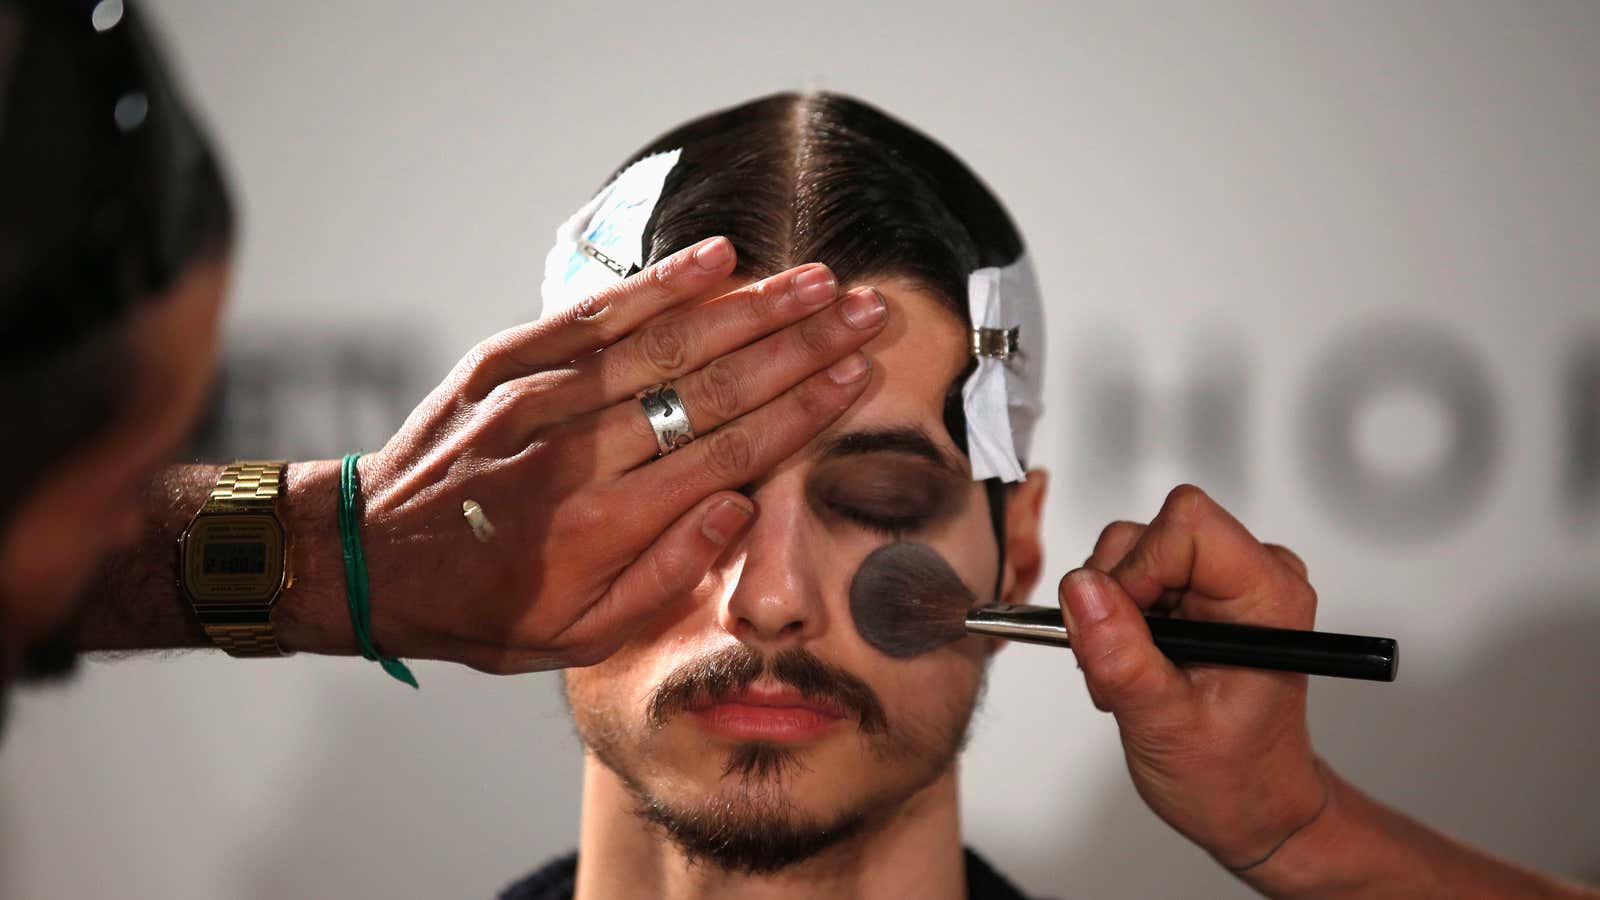 Review: Why BOY DE CHANEL's Latest Male Beauty Collection is Worth  Investing In